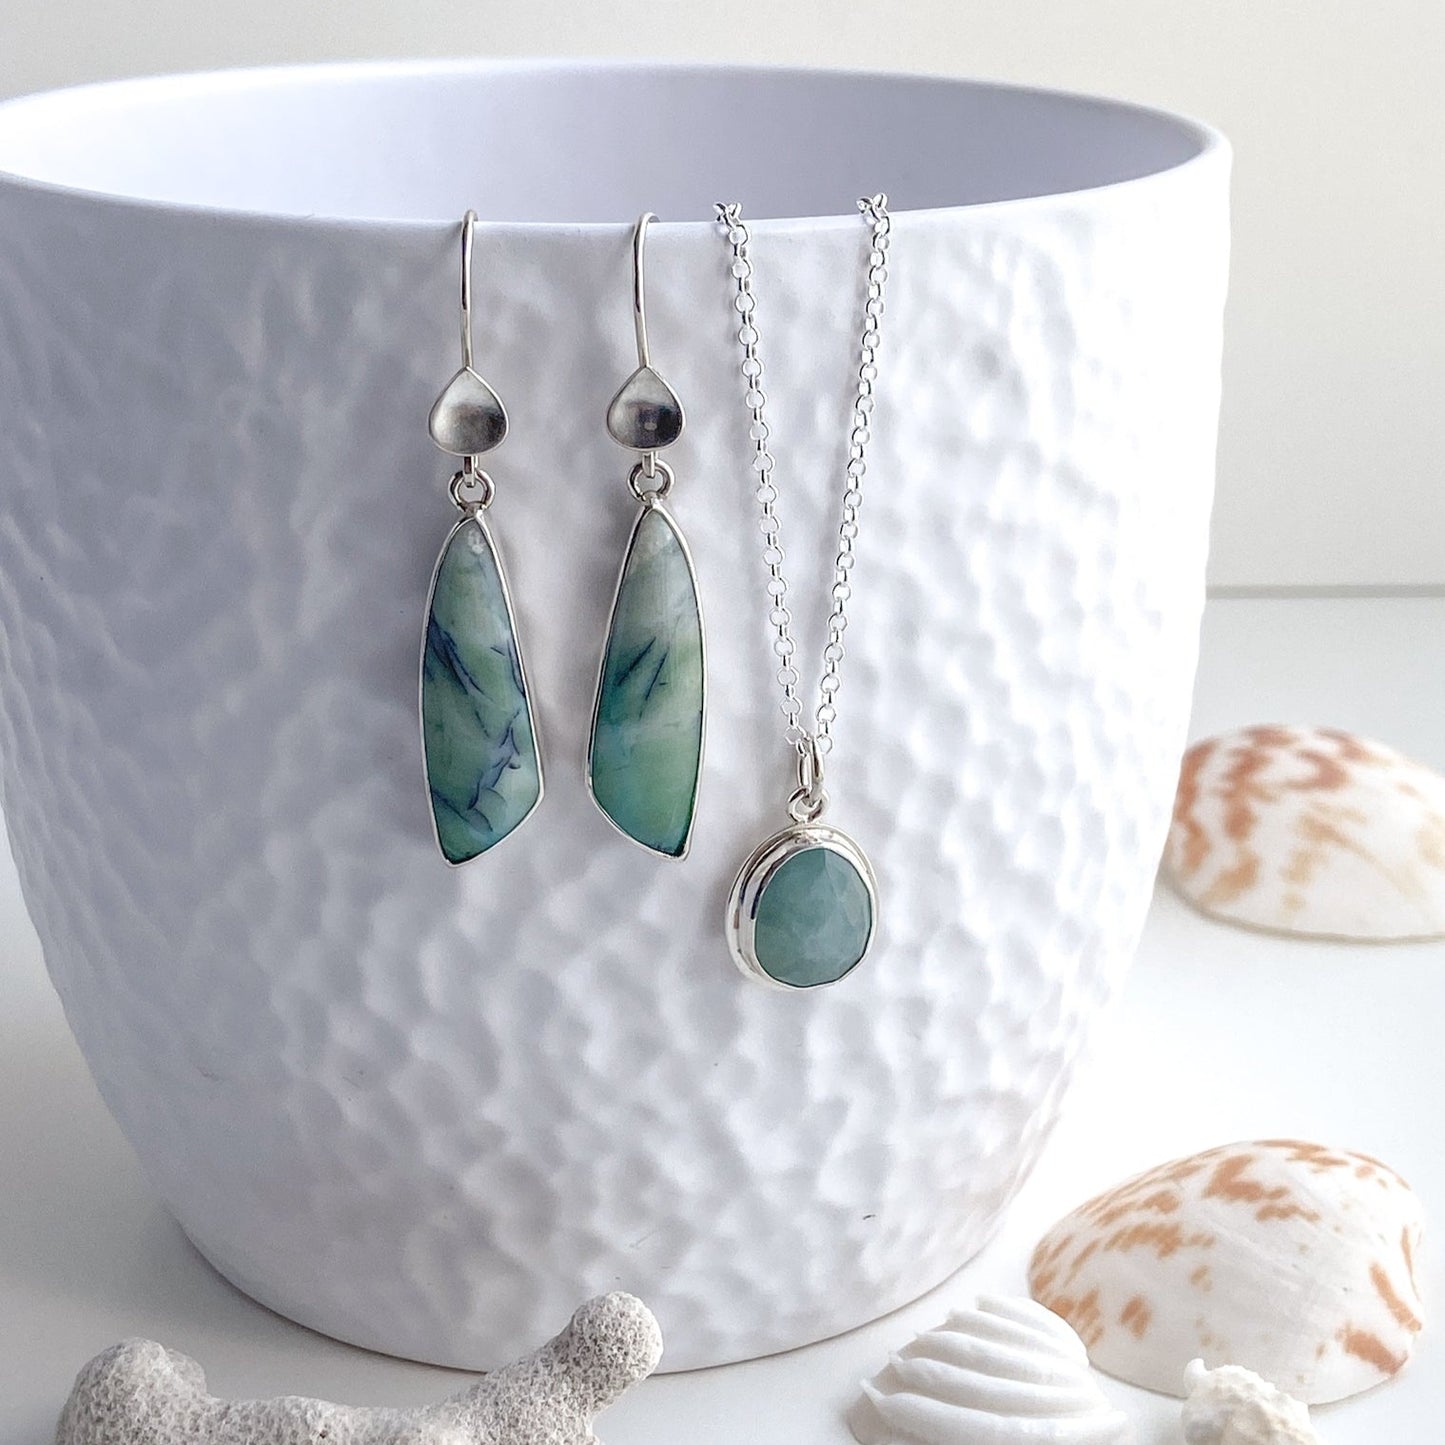 Indonesian opal wood earrings with silver water detail displayed with a sea green Gandiderite pendant on a white vase that is surrounded by seashells